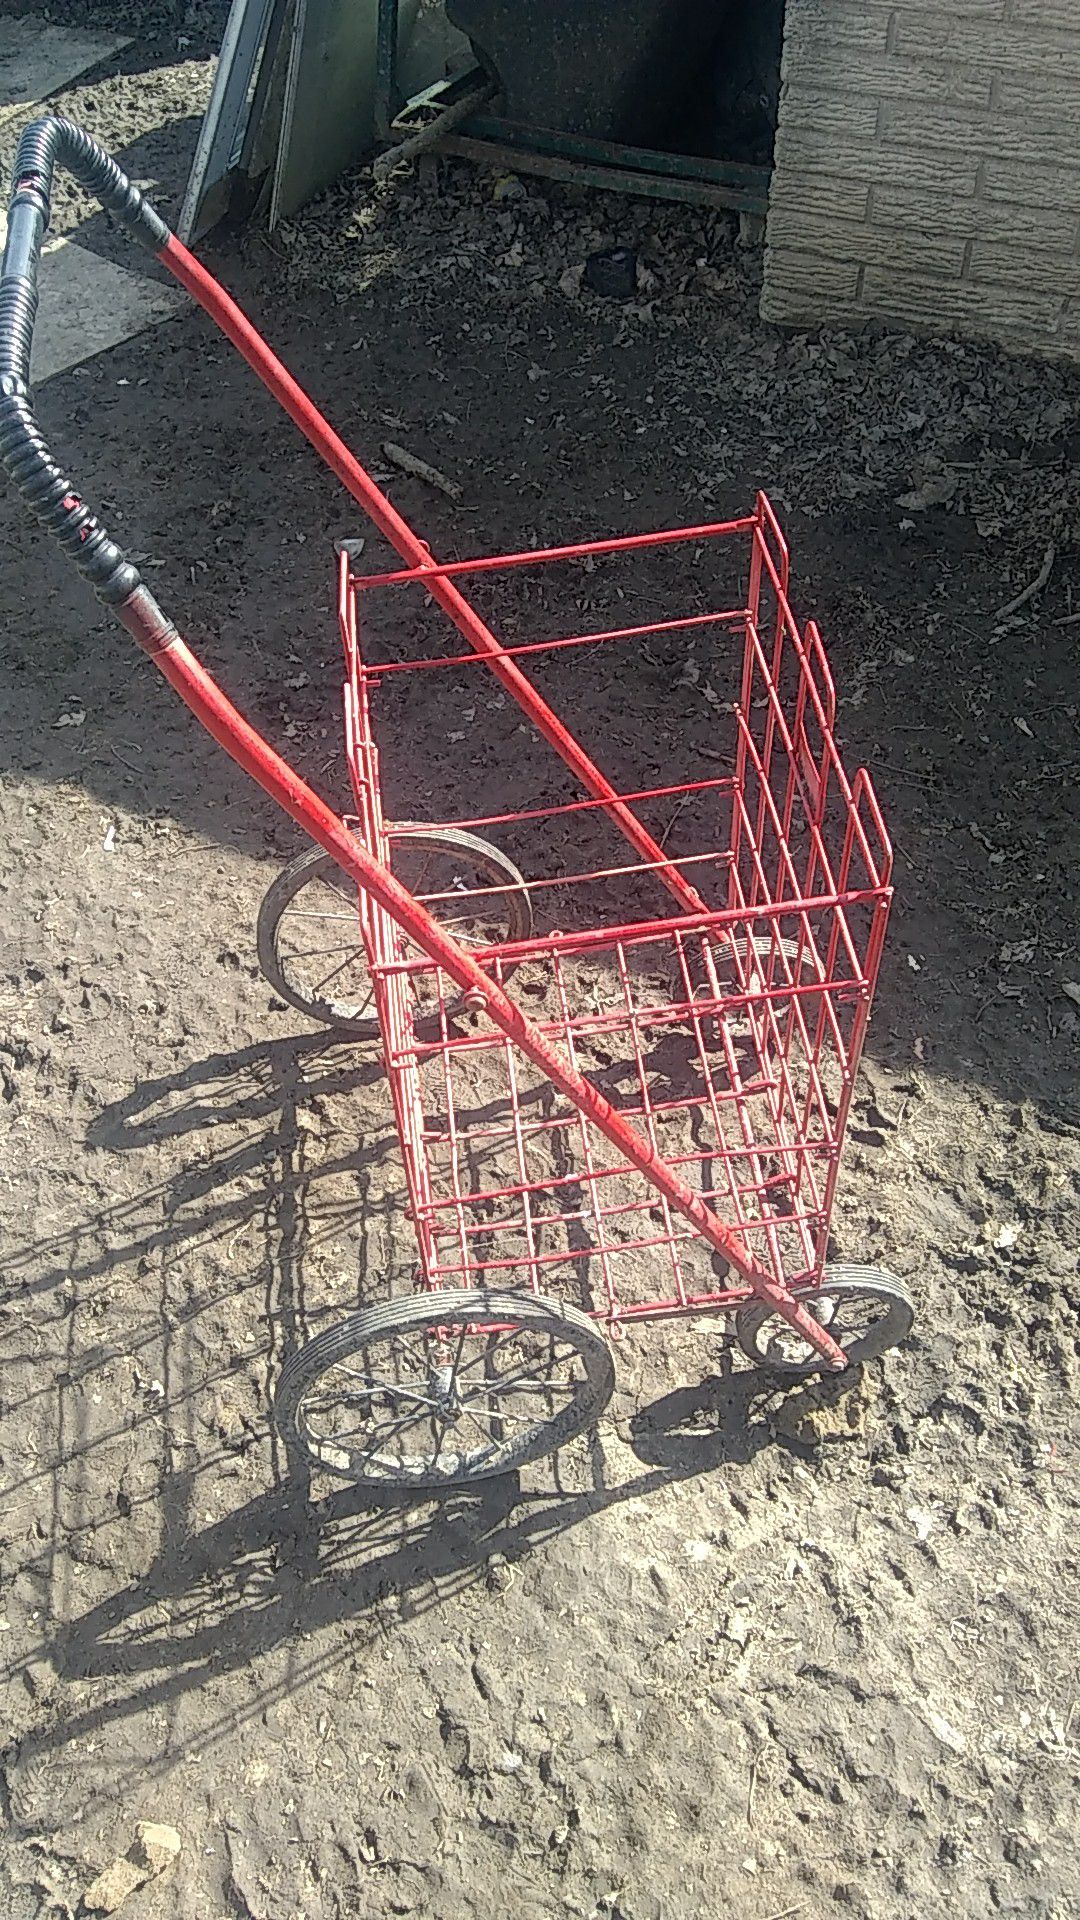 Shopping cart, senior citizen approved,folds up. Included canvas shopping bag, It'll ship.